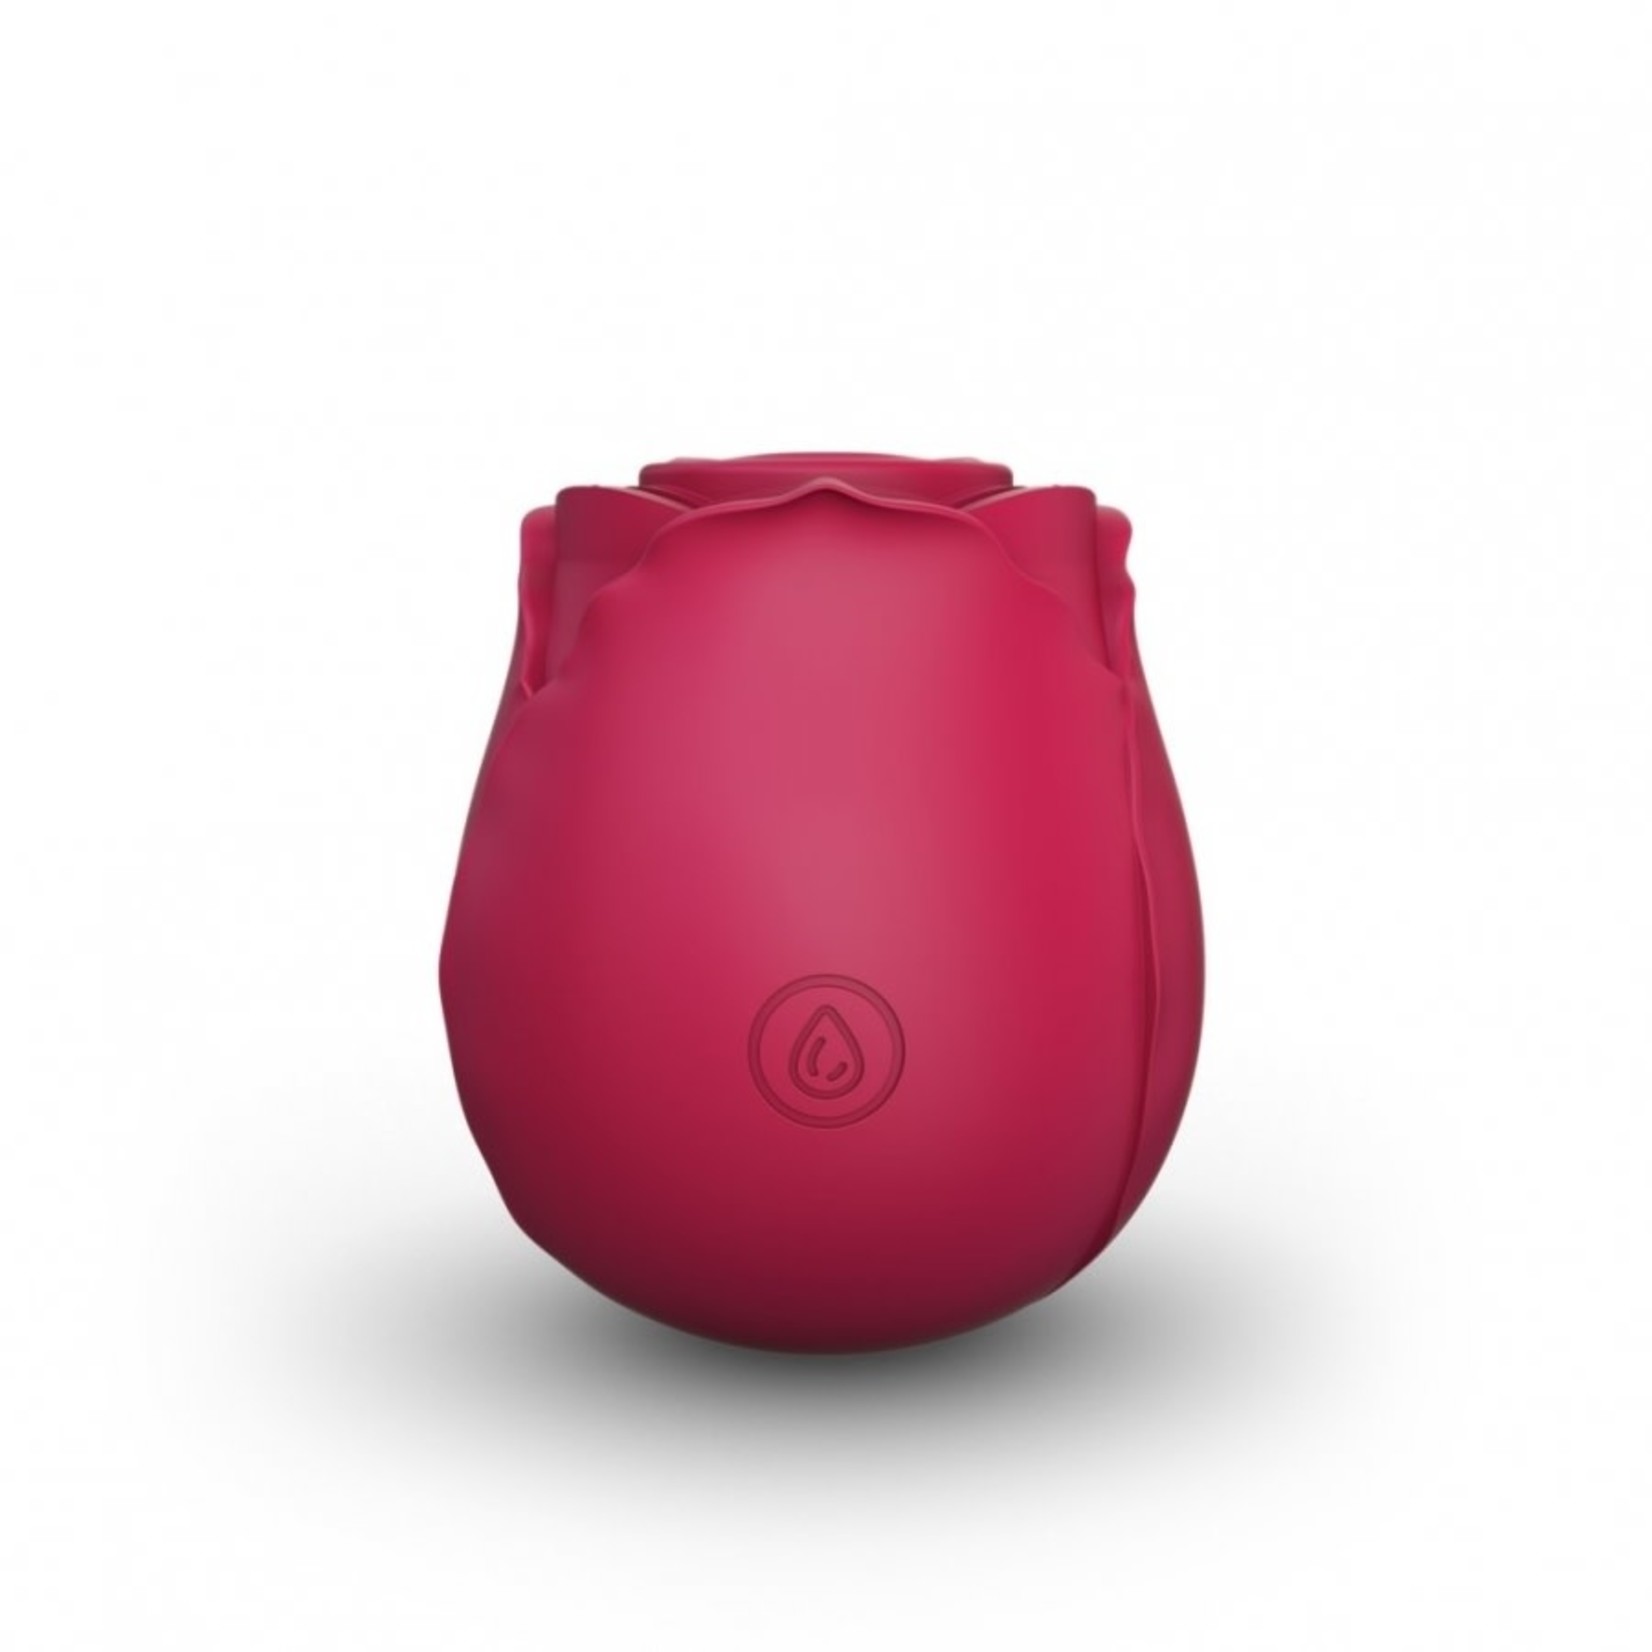 TRACY'S DOG TRACY'S DOG - ROSE VIBRATOR - RED